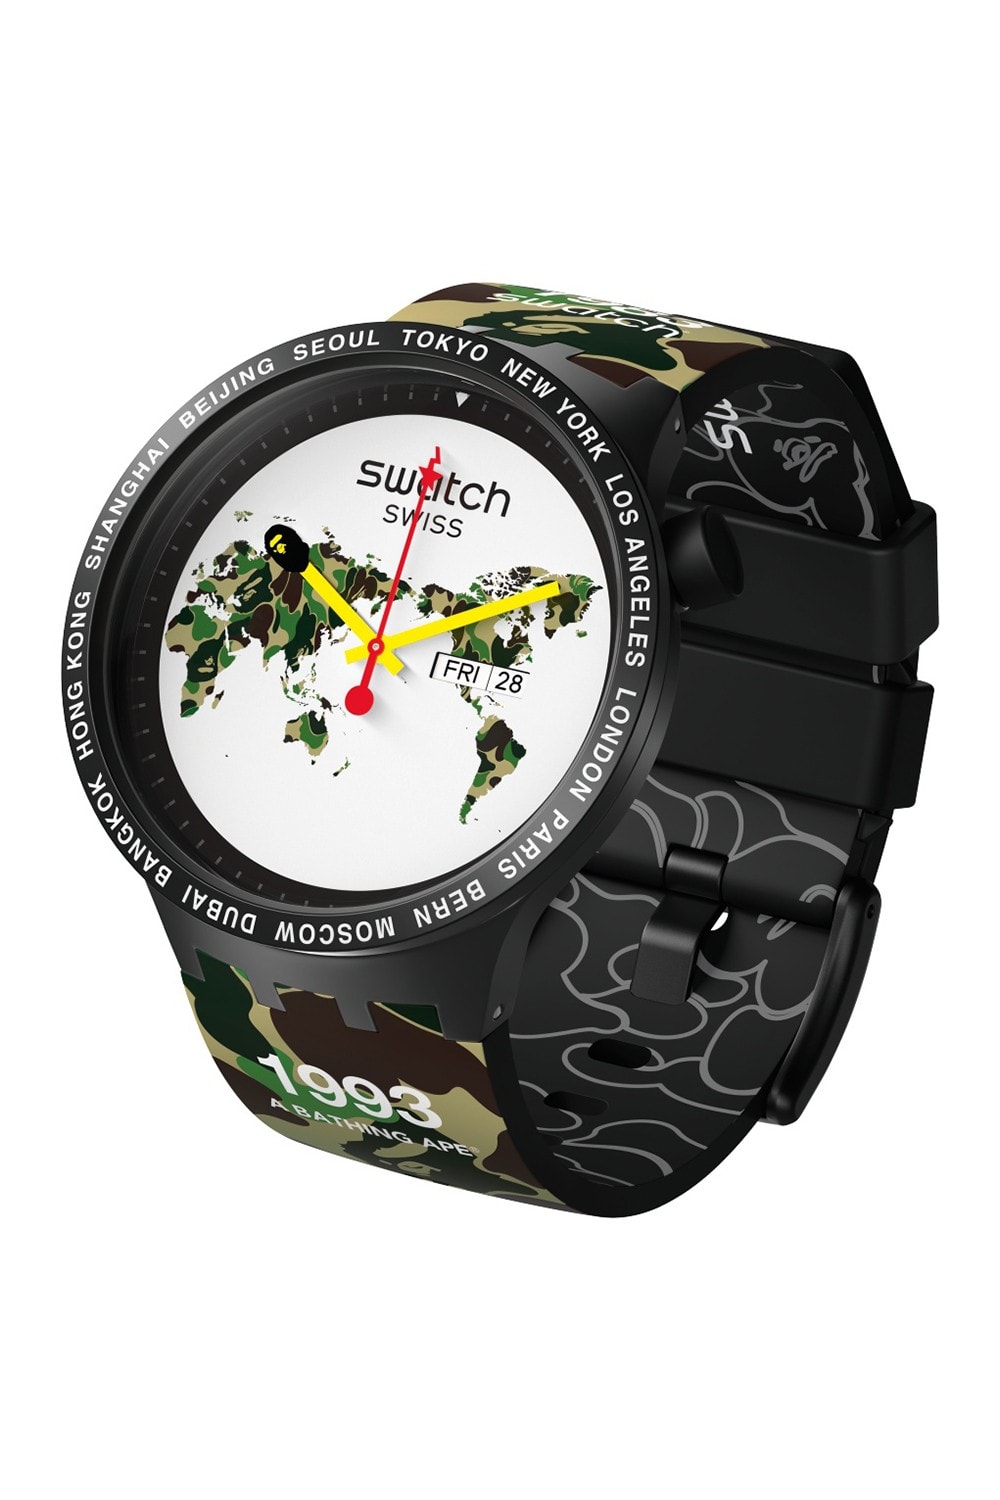 BAPE A Bathing Ape x Swatch Watch Collaboration Camouflage Green Black